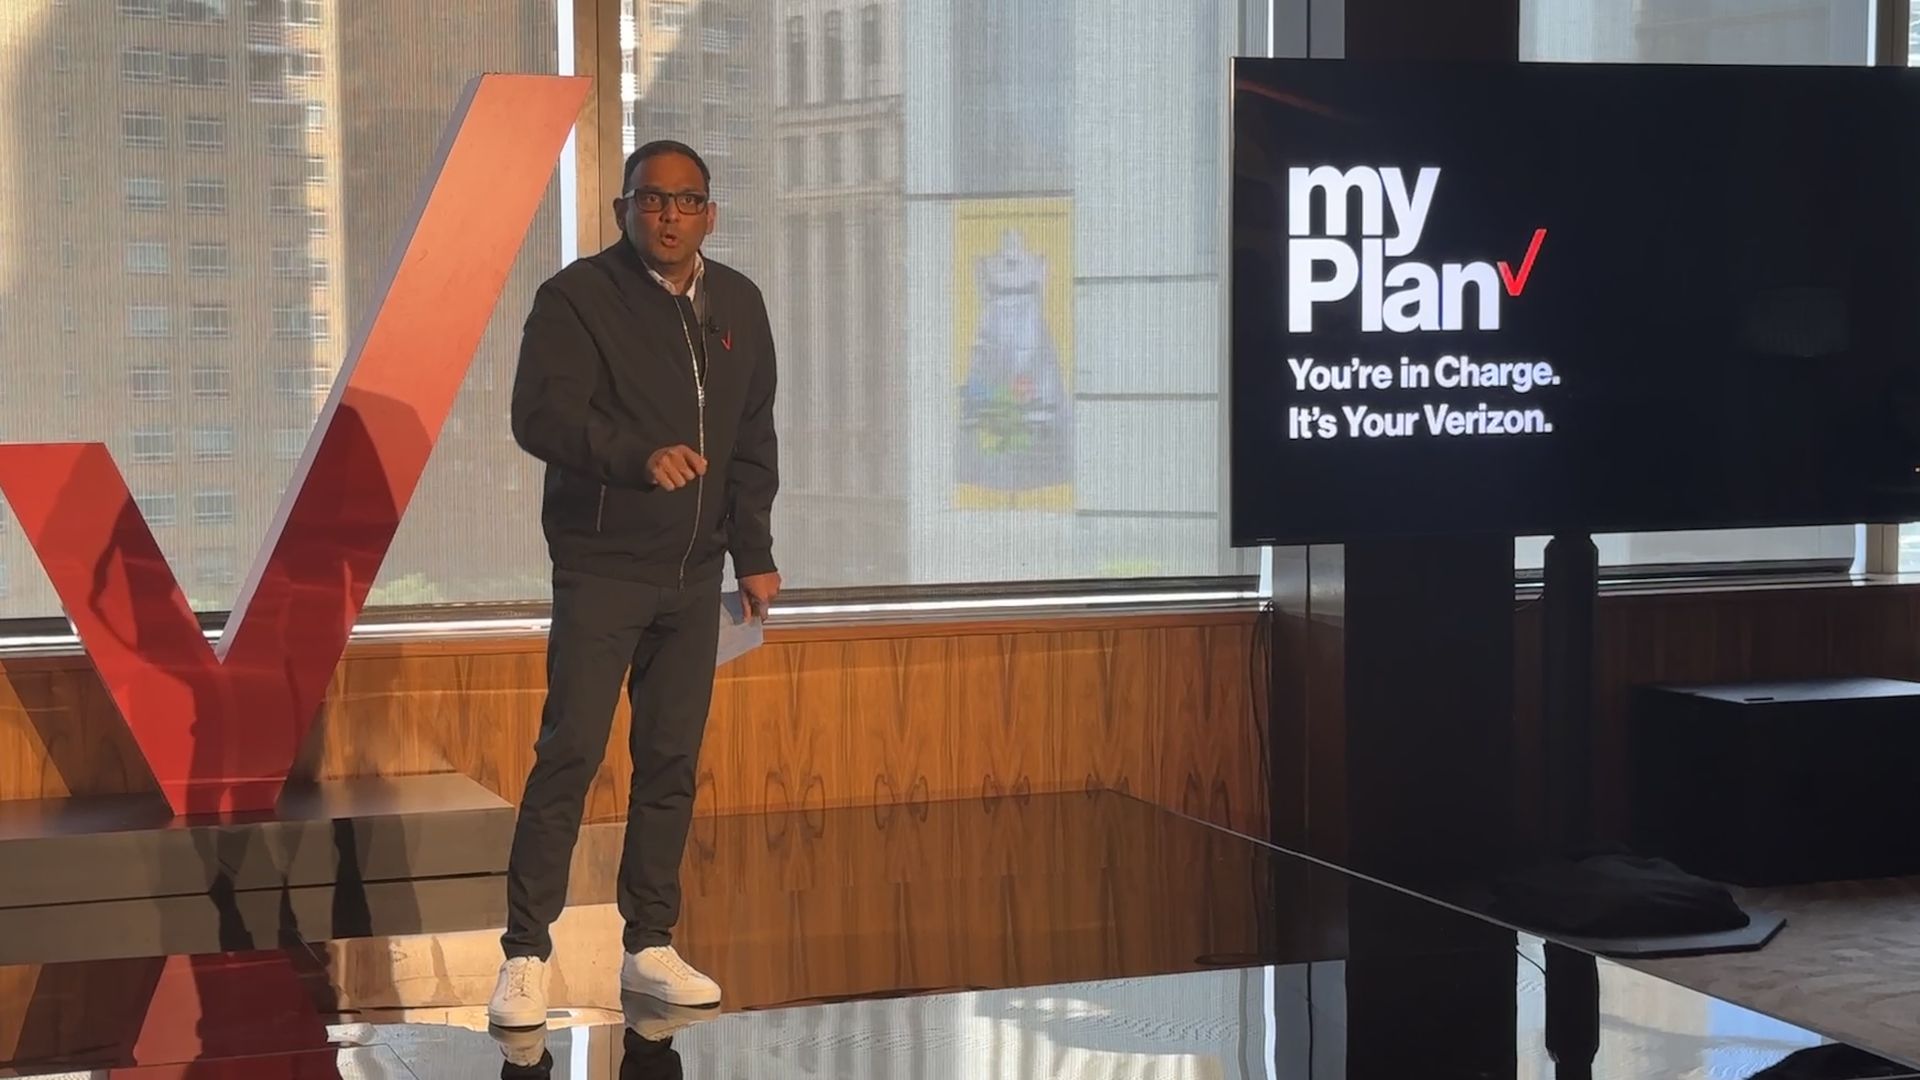 Sowmyanarayan Sampath, CEO of Verizon Consumer Group, speaks onstage at a Verizon event announcing its new mobile phone plan called My Plan